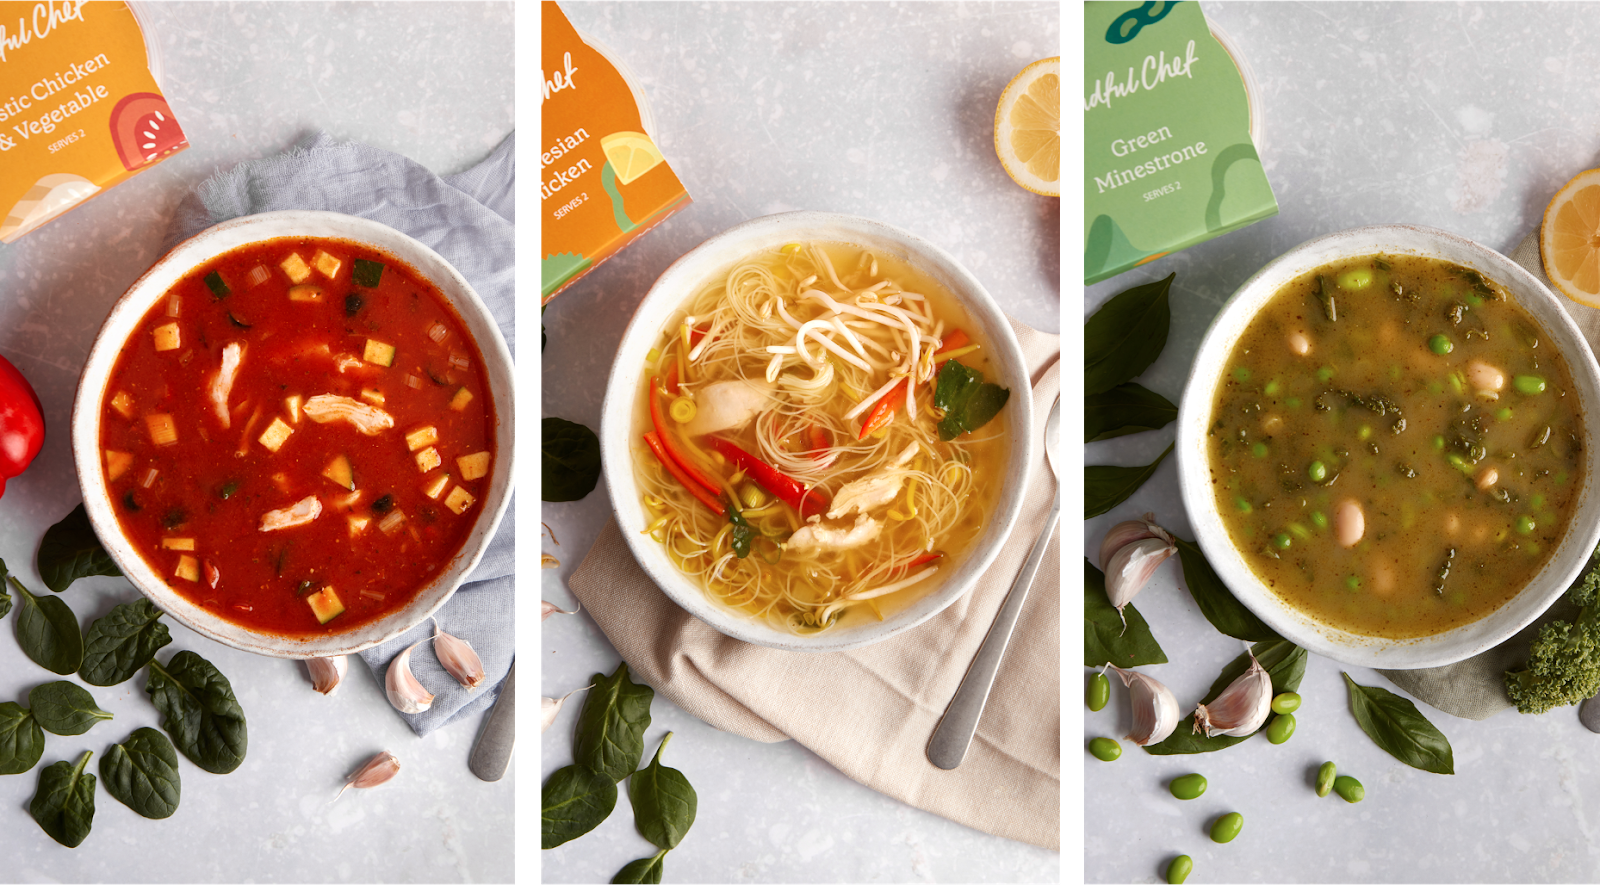 Mindful Chef expands offering with nutritious soups now on the menu